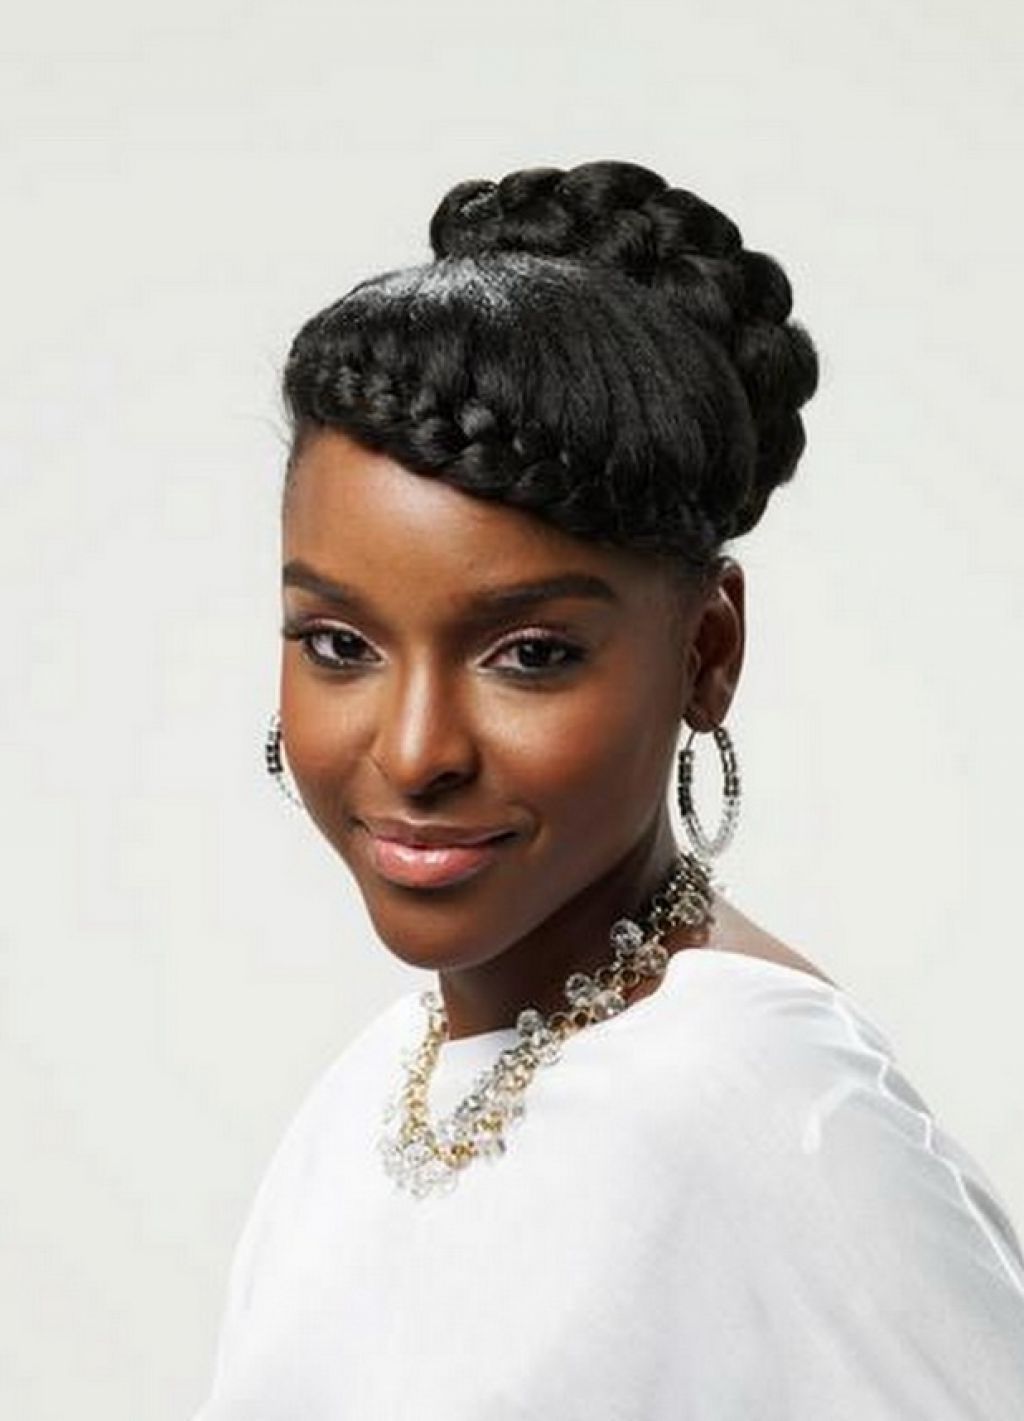 15 Fashionable Natural Updo Hairstyles | Braid Hairstyles, Goddess Throughout Braided Bun Updo African American Hairstyles (View 9 of 15)